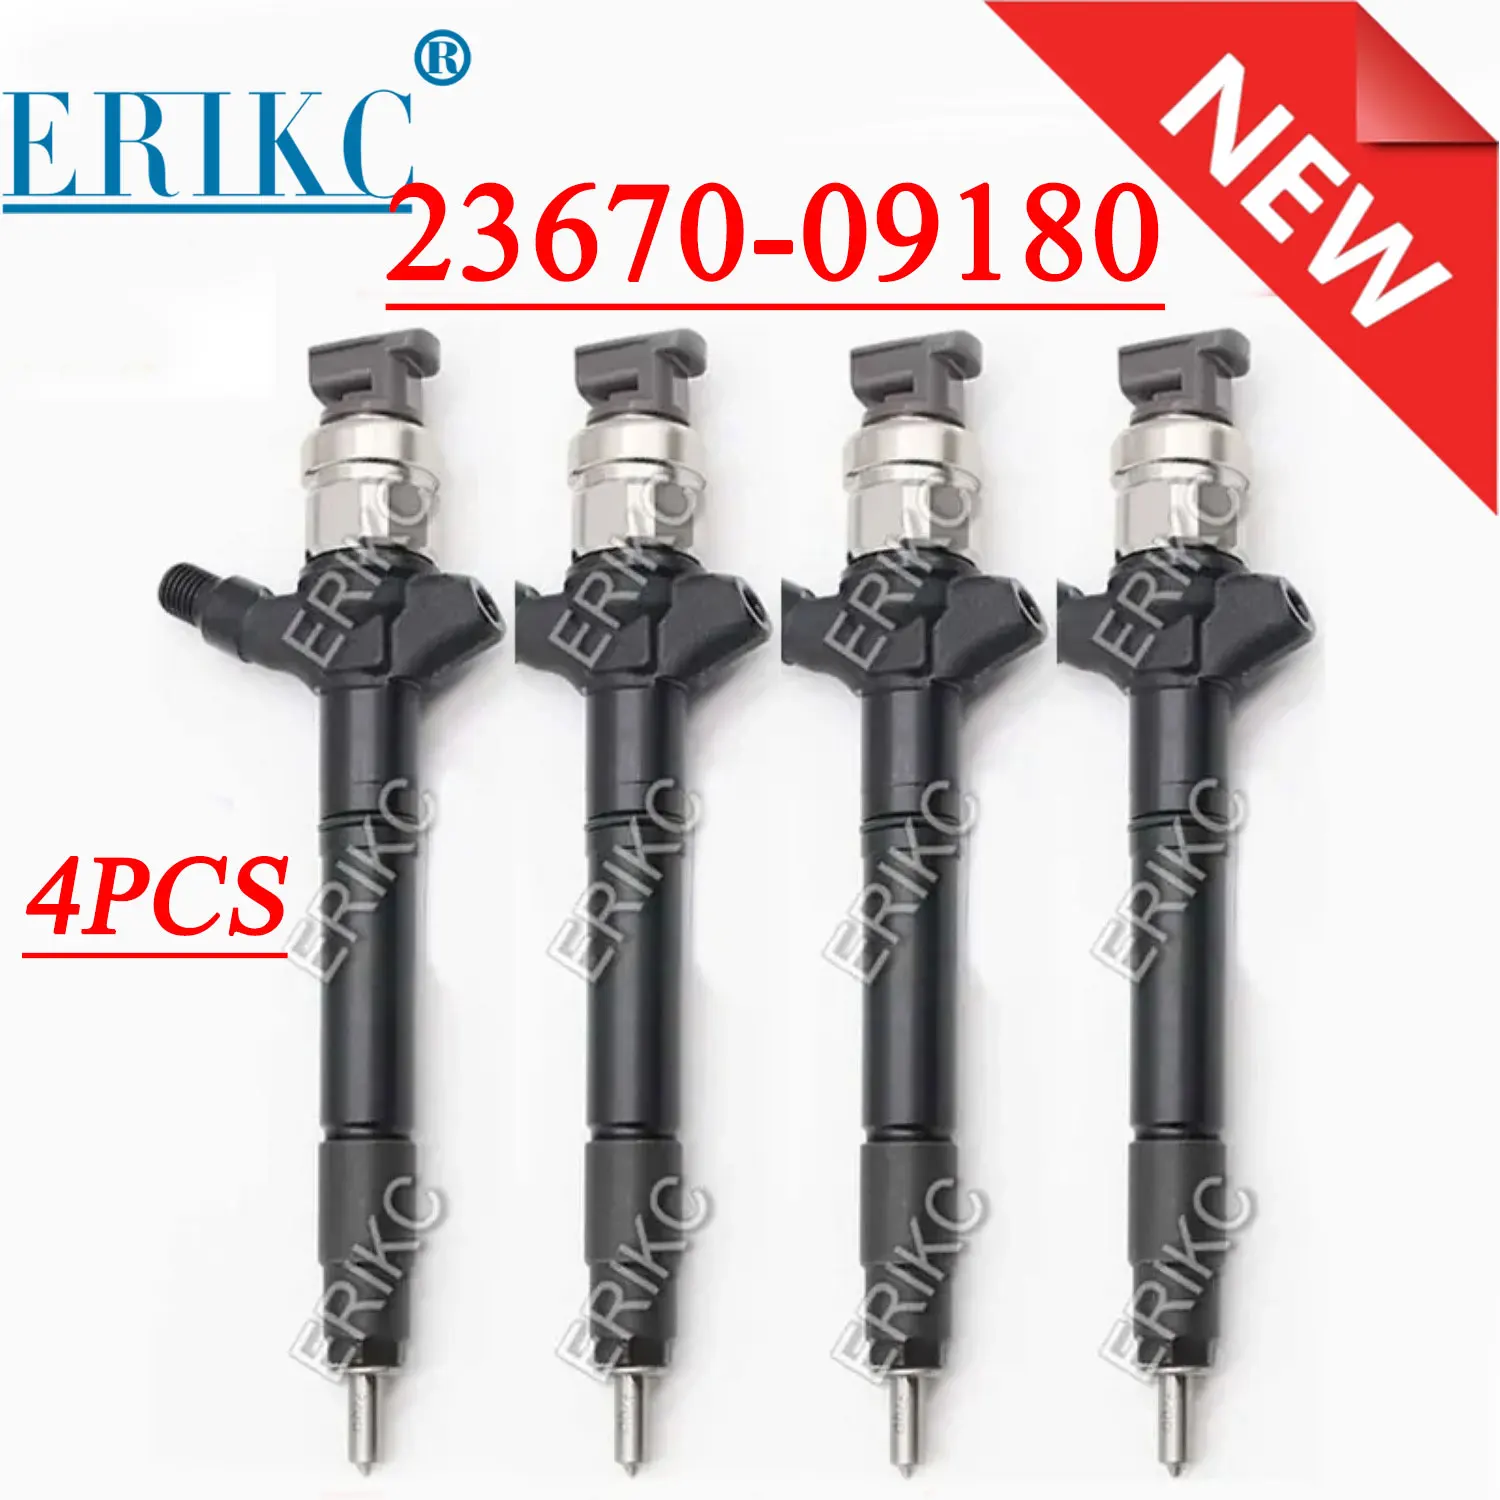 

4PCS 23670-09180 Diesel Injector Sprayer Set 2367009180 Fuel Injection Assembly Nozzle 23670 09180 For DENSO TOYOTA HILUX Hiace